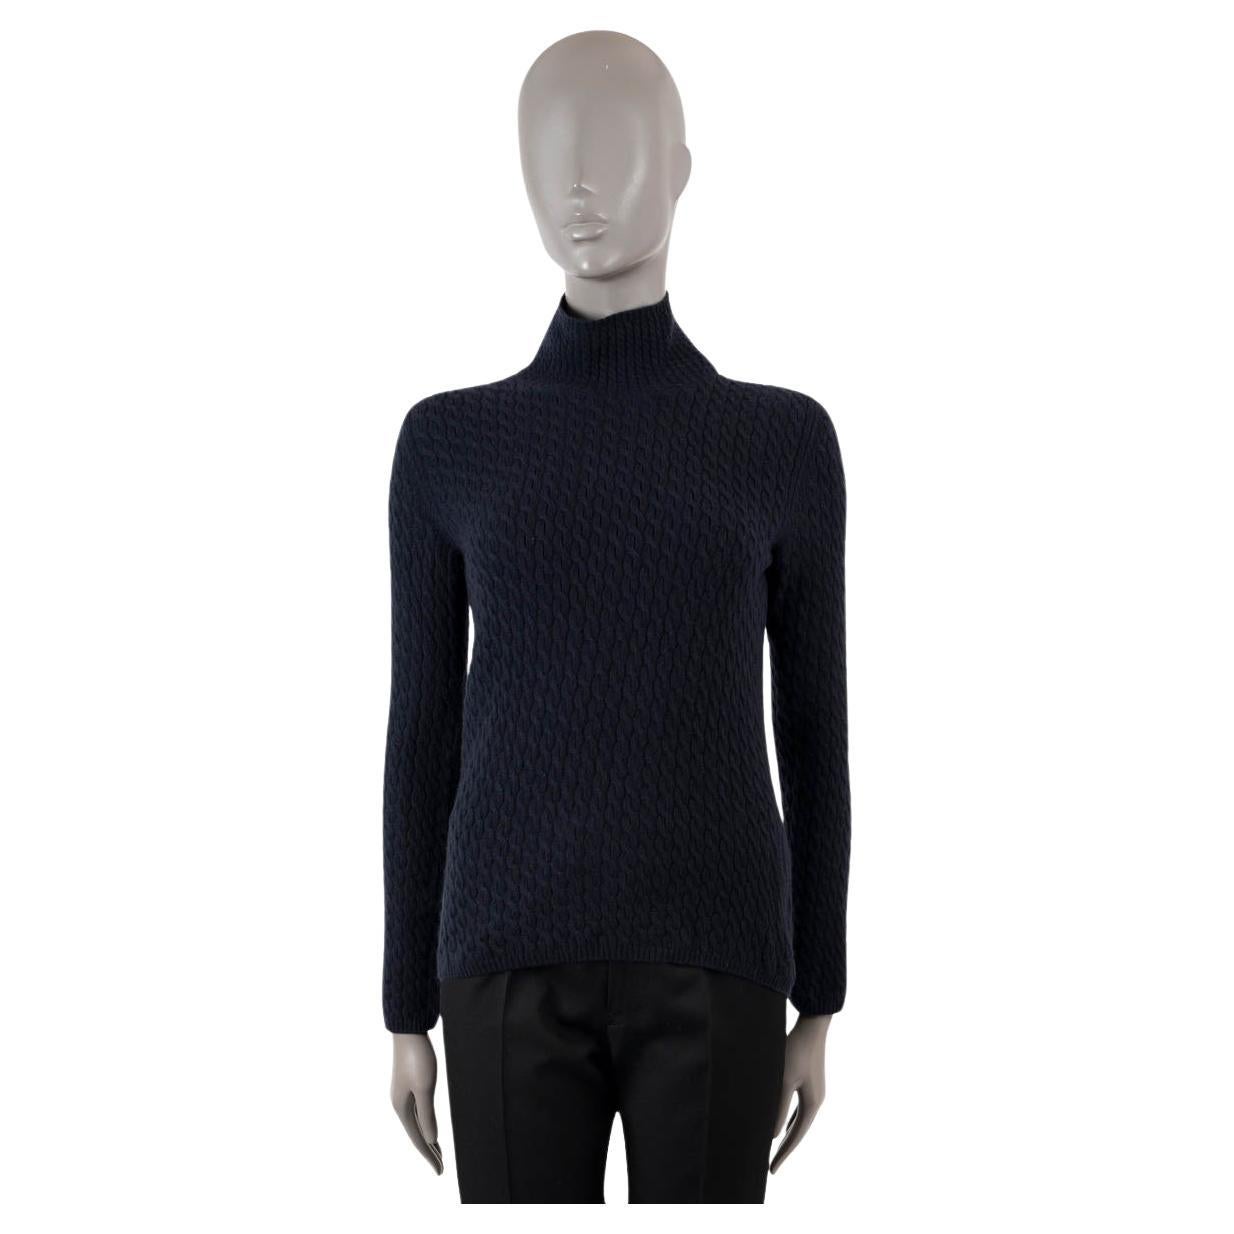 LORO PIANA navy blue cashmere CABLE KNIT MOCK NECK Sweater 44  fits S